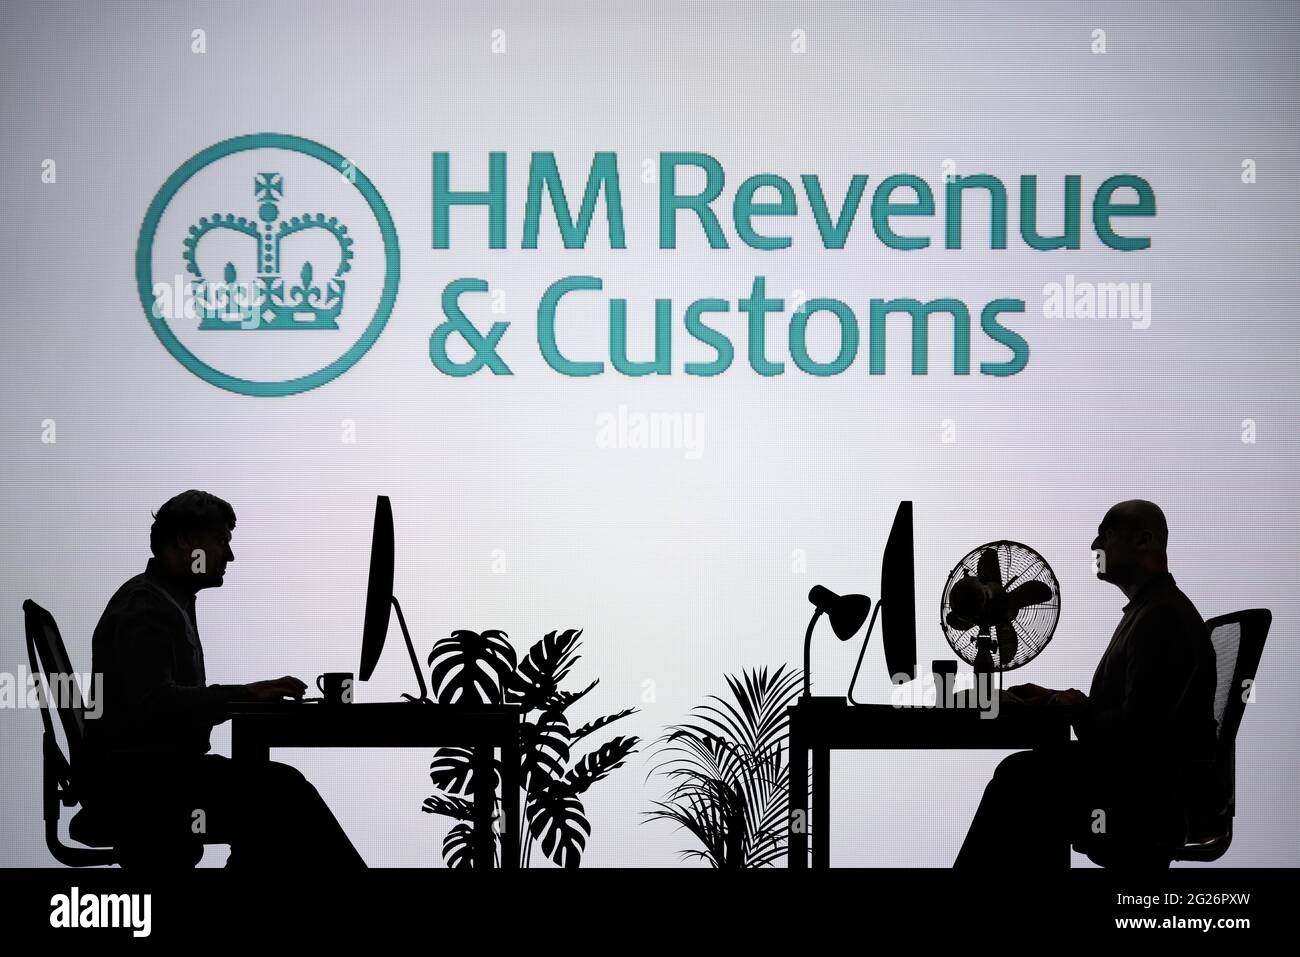 The HMRC logo is seen on an LED screen in the background while two silhouetted people work in an office environment (Editorial use only) Stock Photo